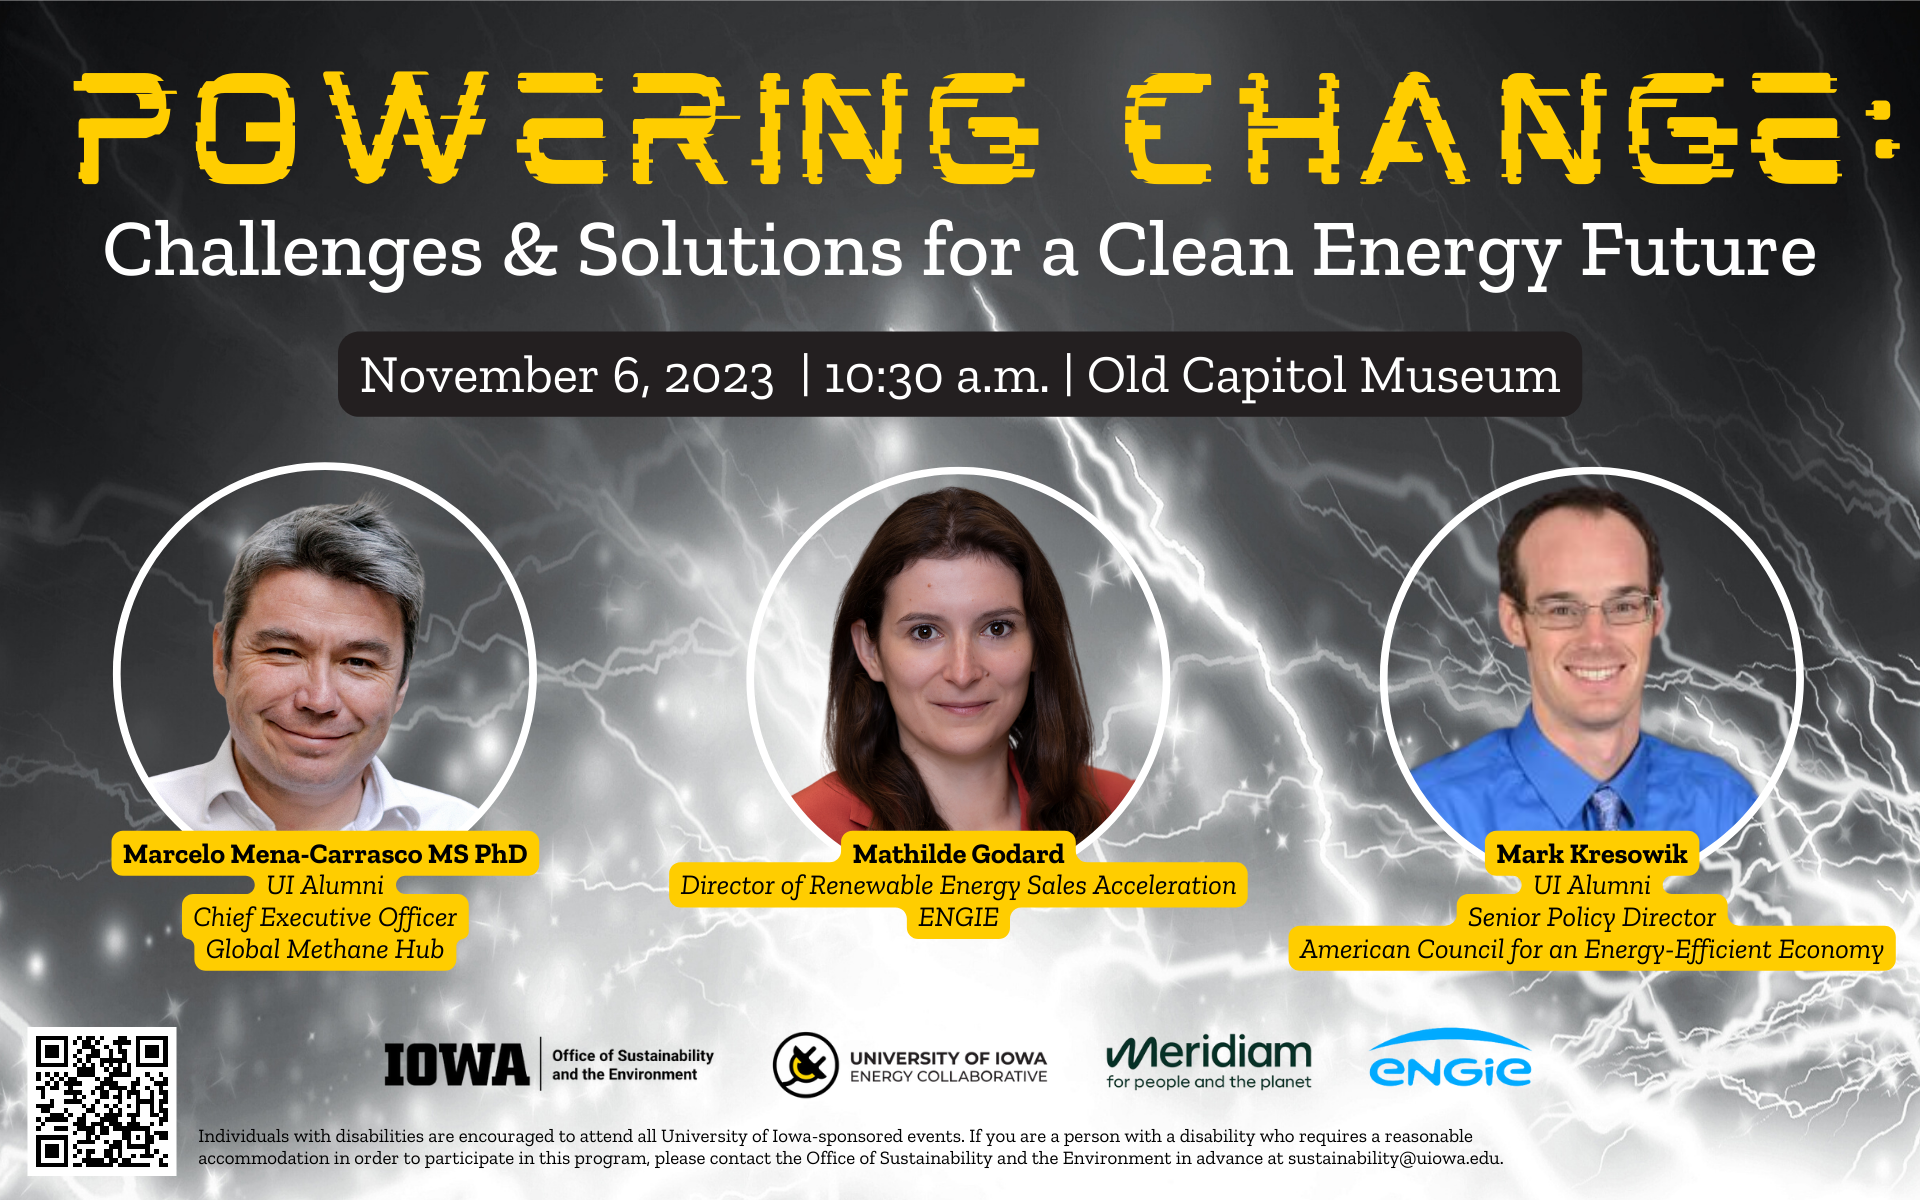 Powering Change: Challenges & Solutions for a Clean Energy Future